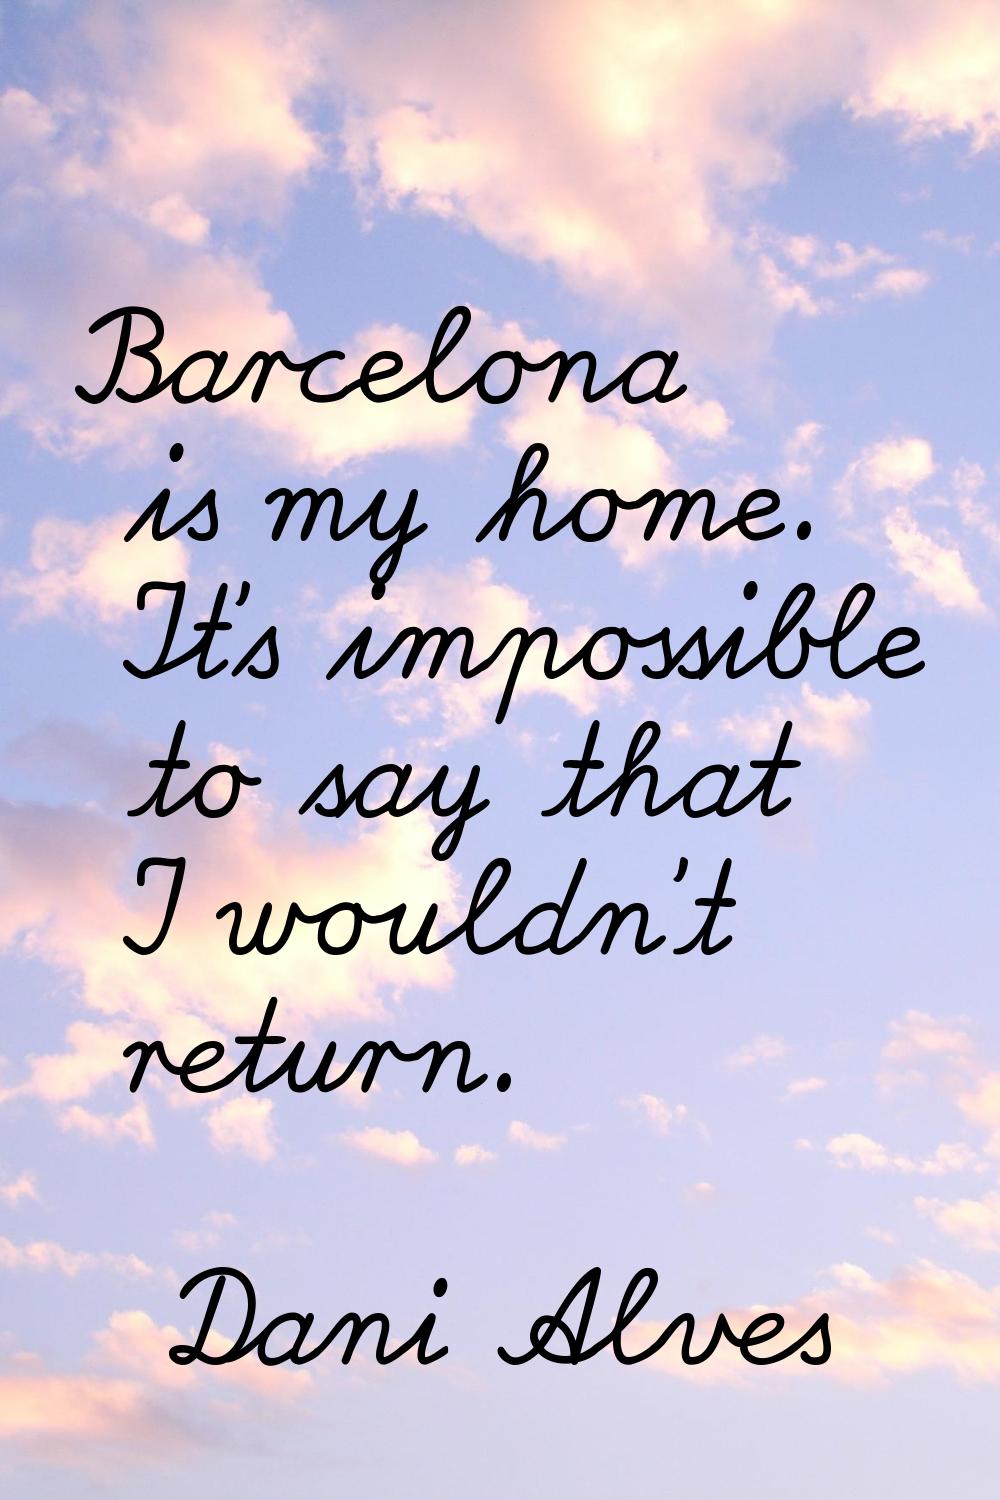 Barcelona is my home. It's impossible to say that I wouldn't return.